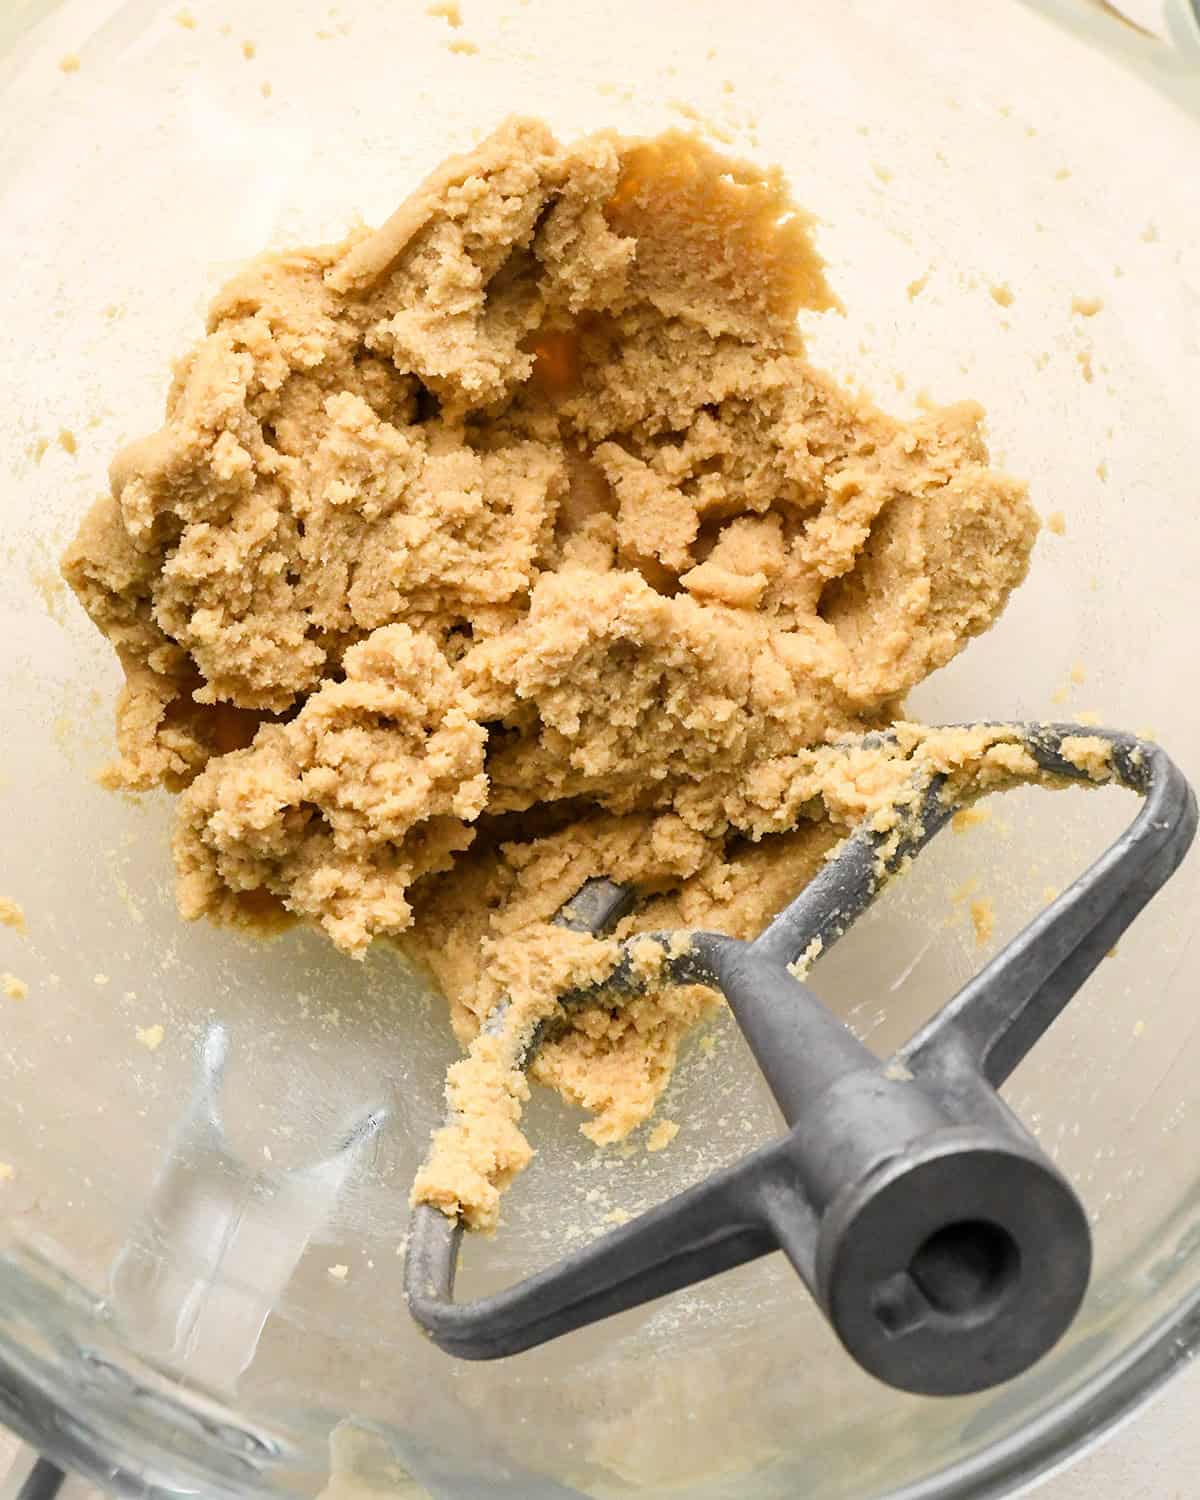 How to Make Edible Cookie Dough - butter and sugars after beating